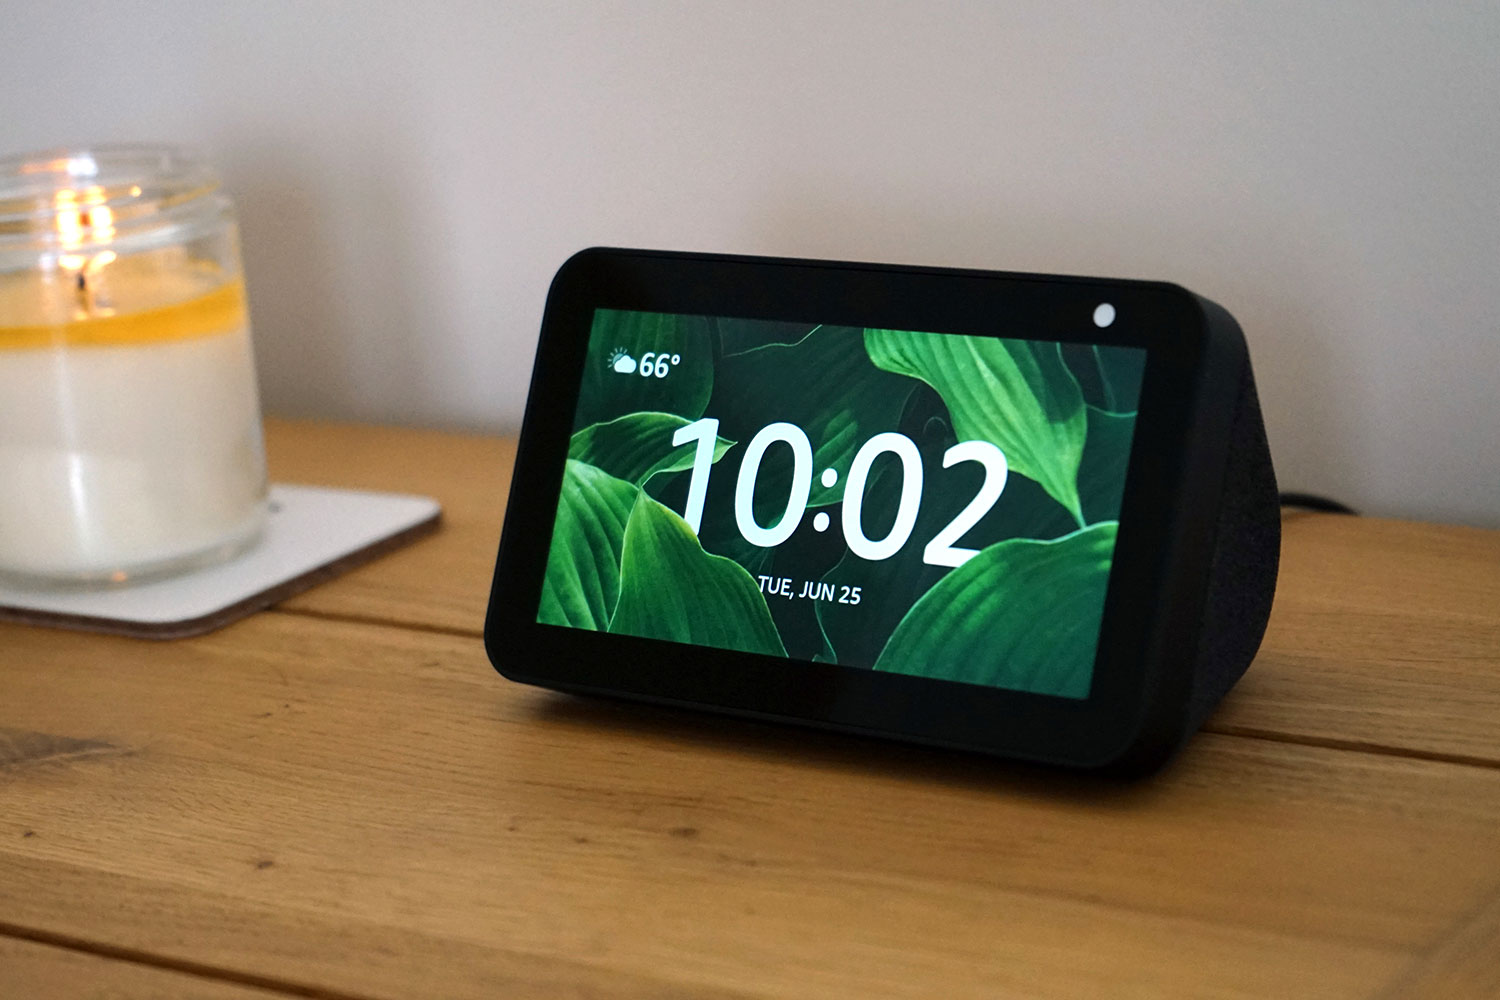 Echo Show 5 (2nd Gen) Review: a Smart Alarm Clock but Not Much More